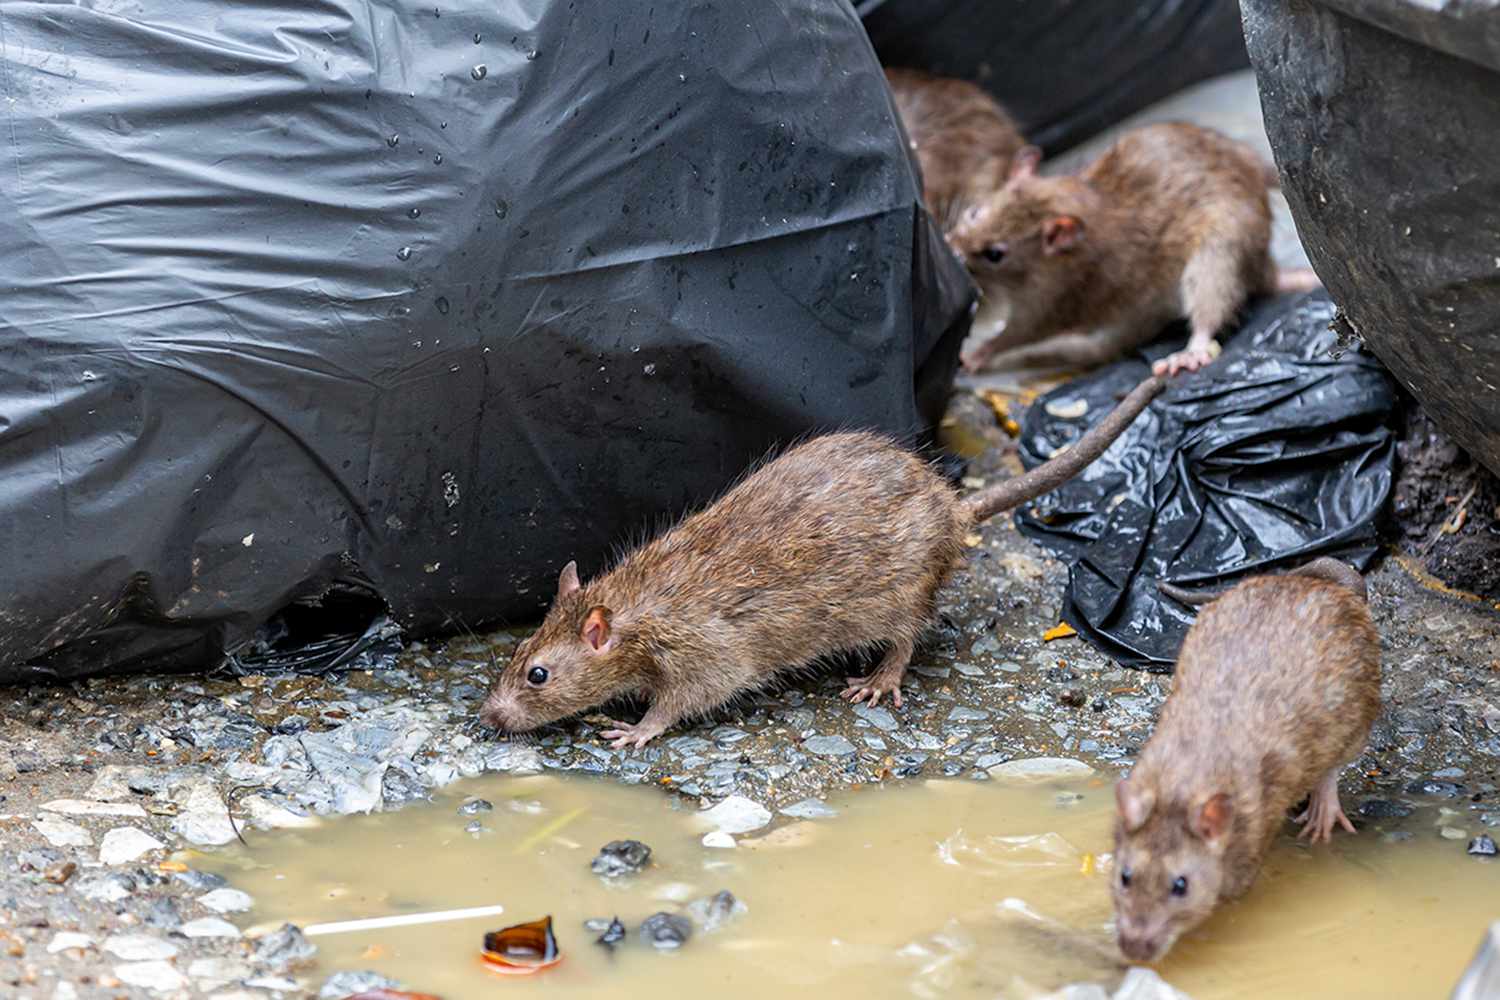 Cases of Illness Linked to Rat Urine in NYC [Video]